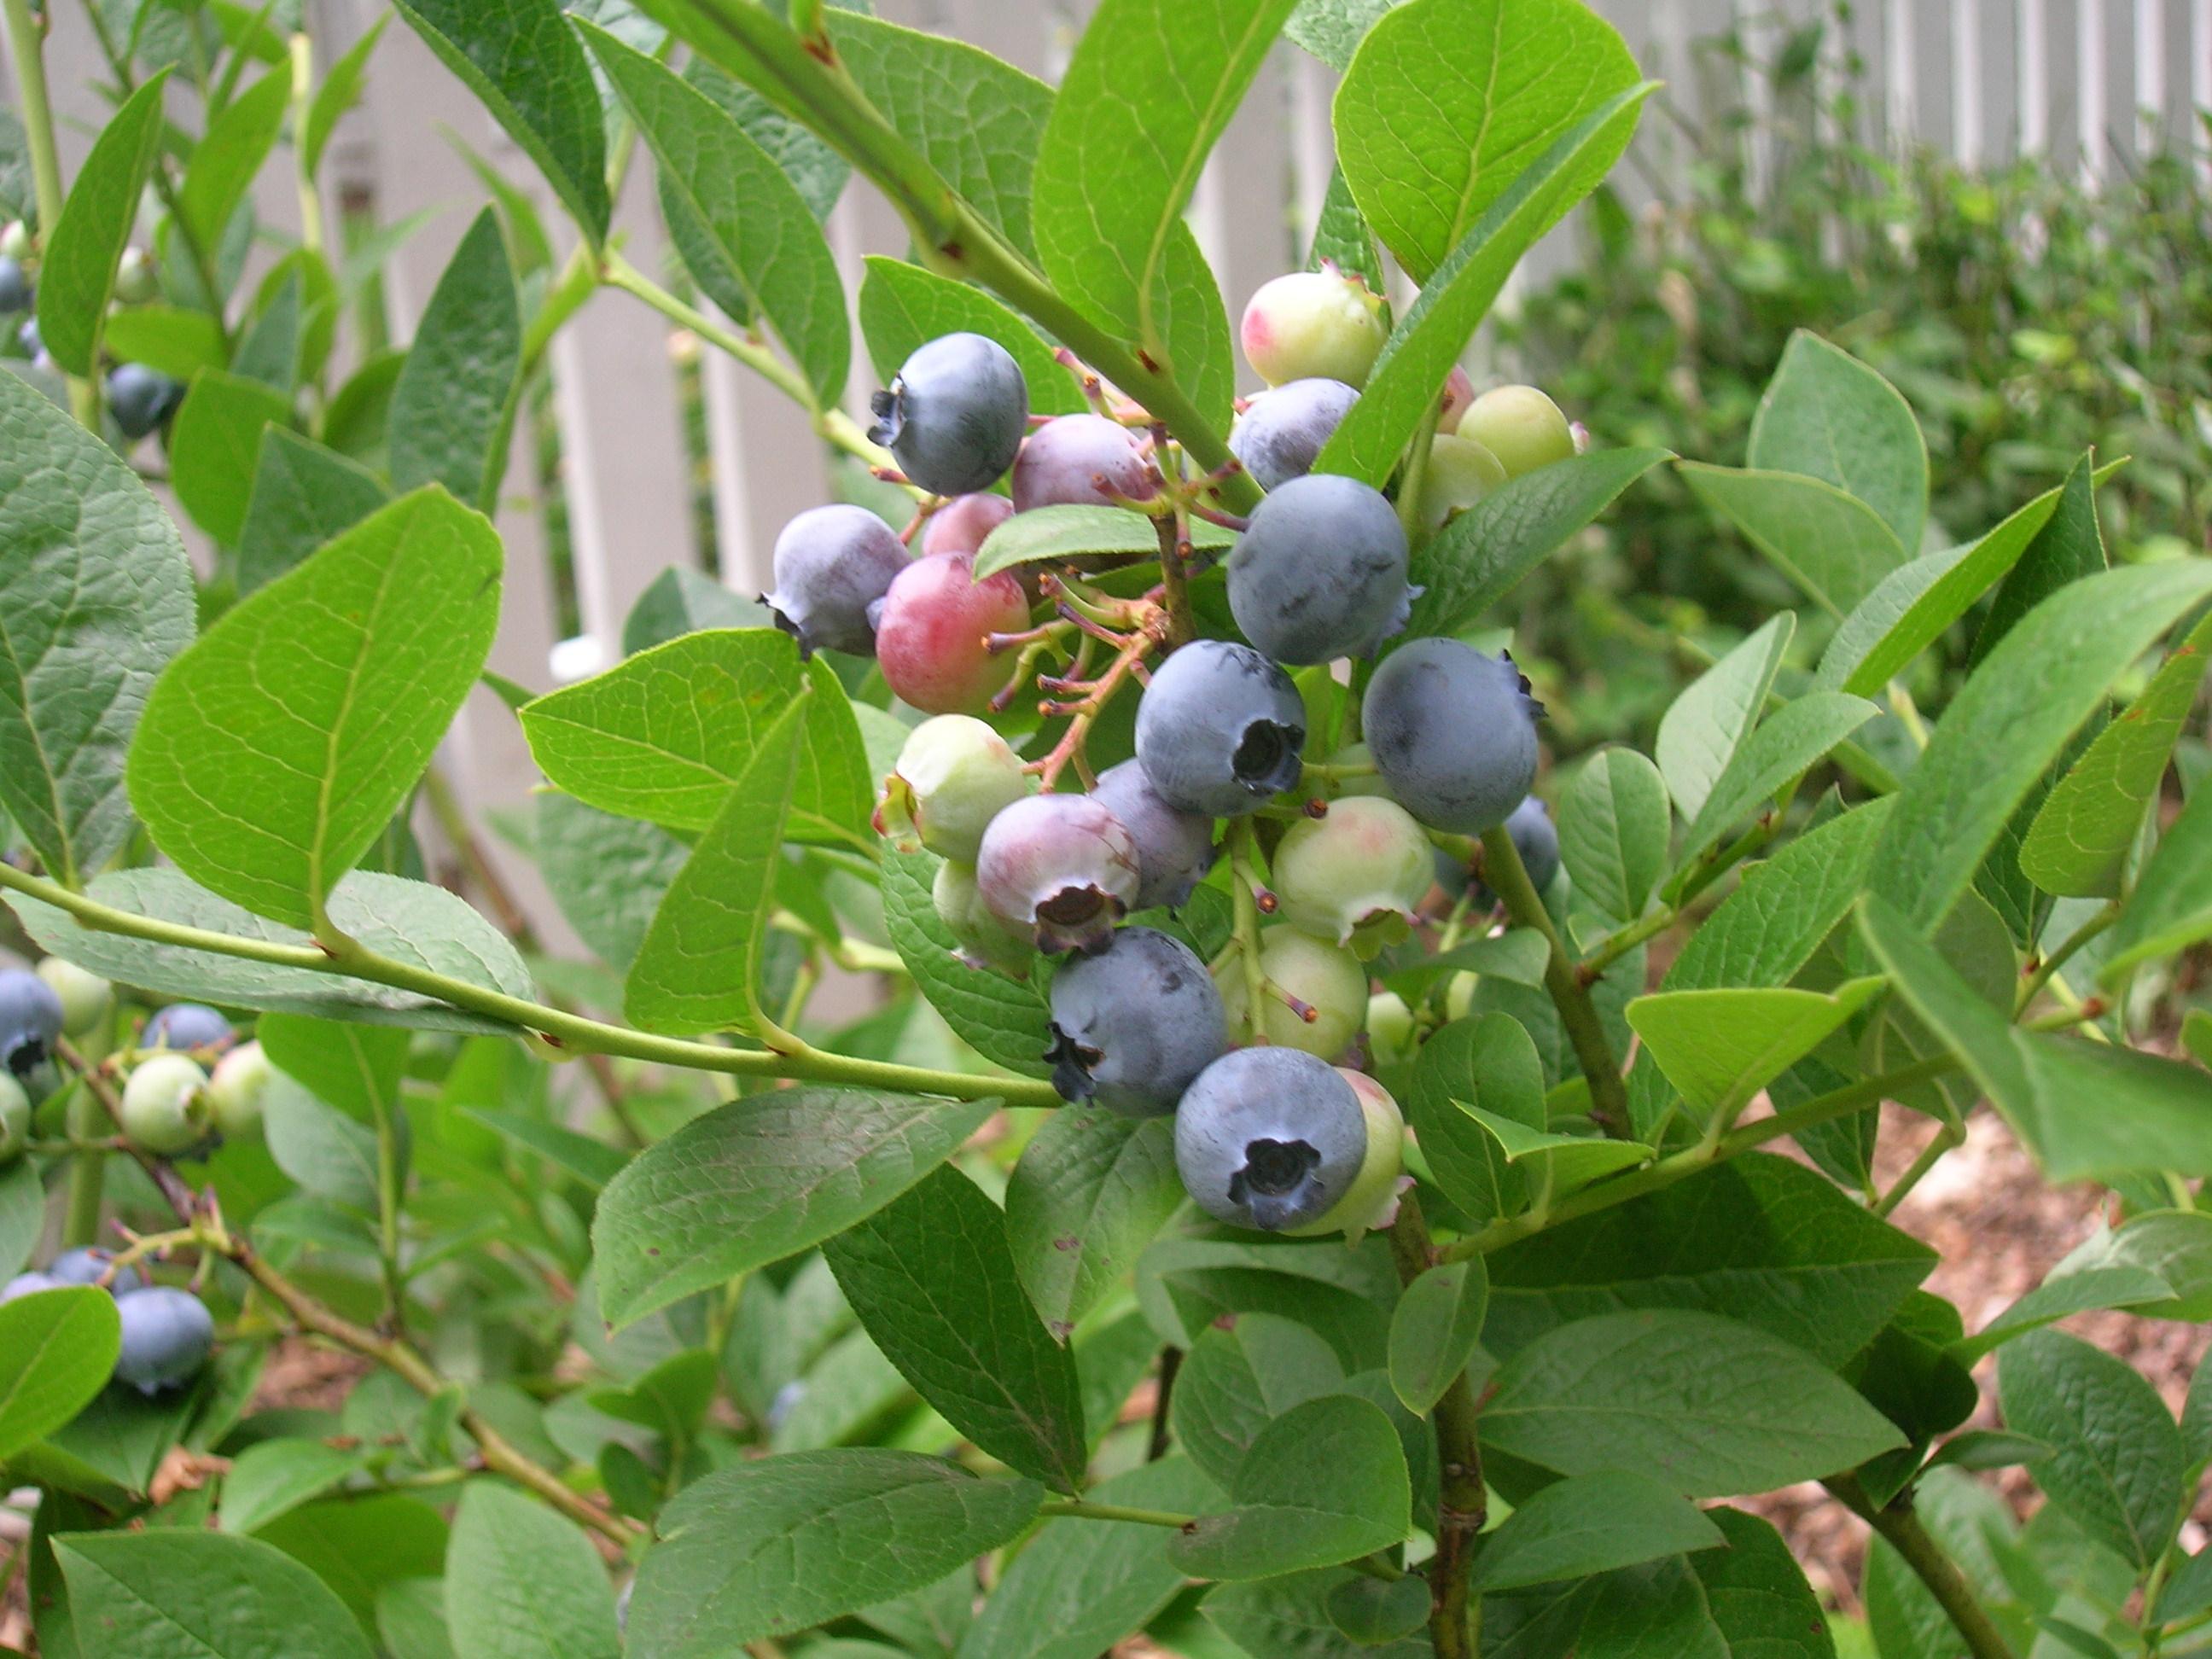 blueberries ripening on a plant in a home garden